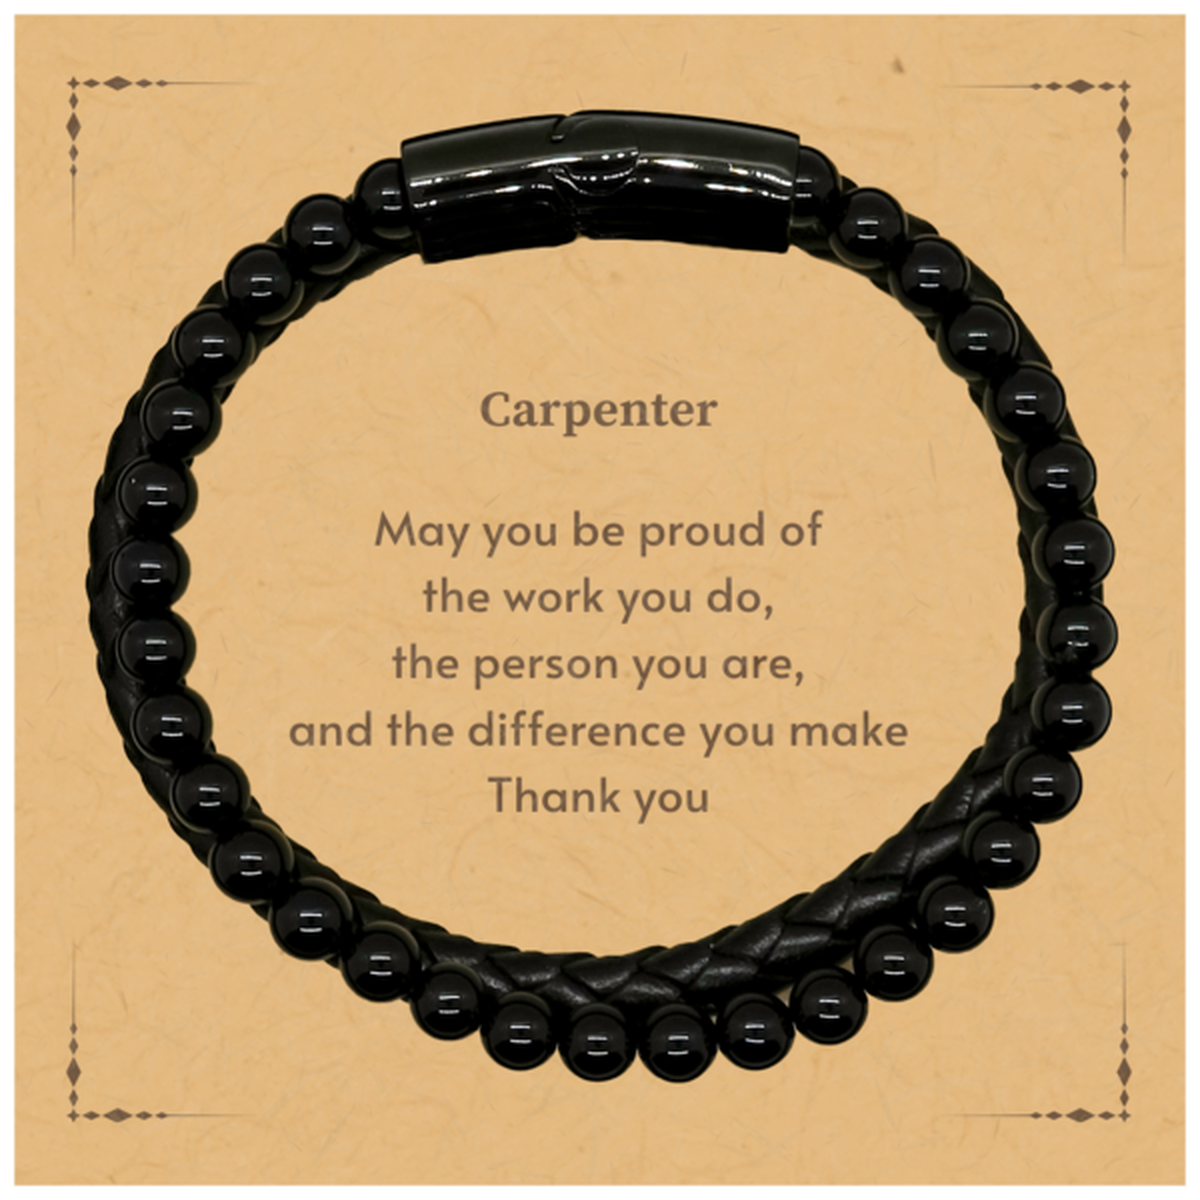 Heartwarming Stone Leather Bracelets Retirement Coworkers Gifts for Carpenter, Carpenter May You be proud of the work you do, the person you are Gifts for Boss Men Women Friends